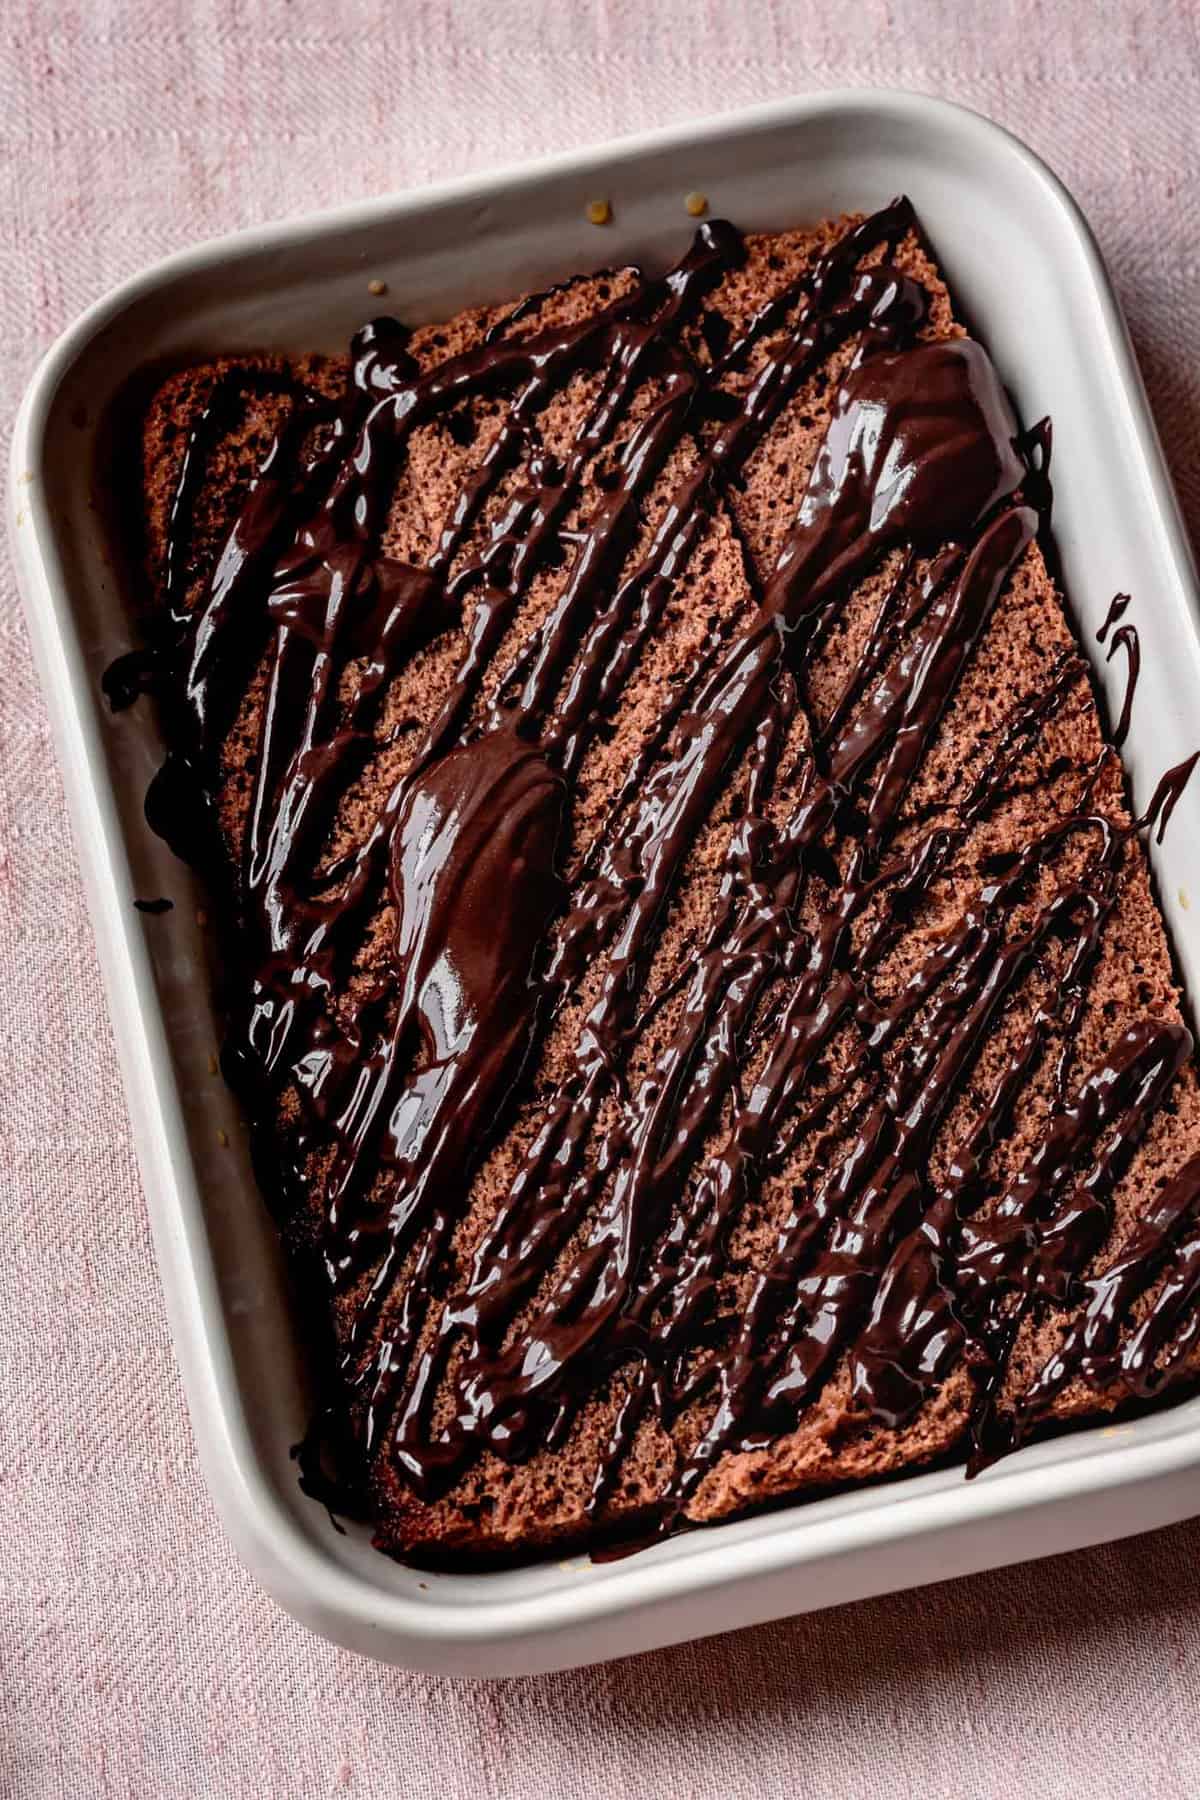 glossy Nutella drizzled over slices of chocolate sponge cake